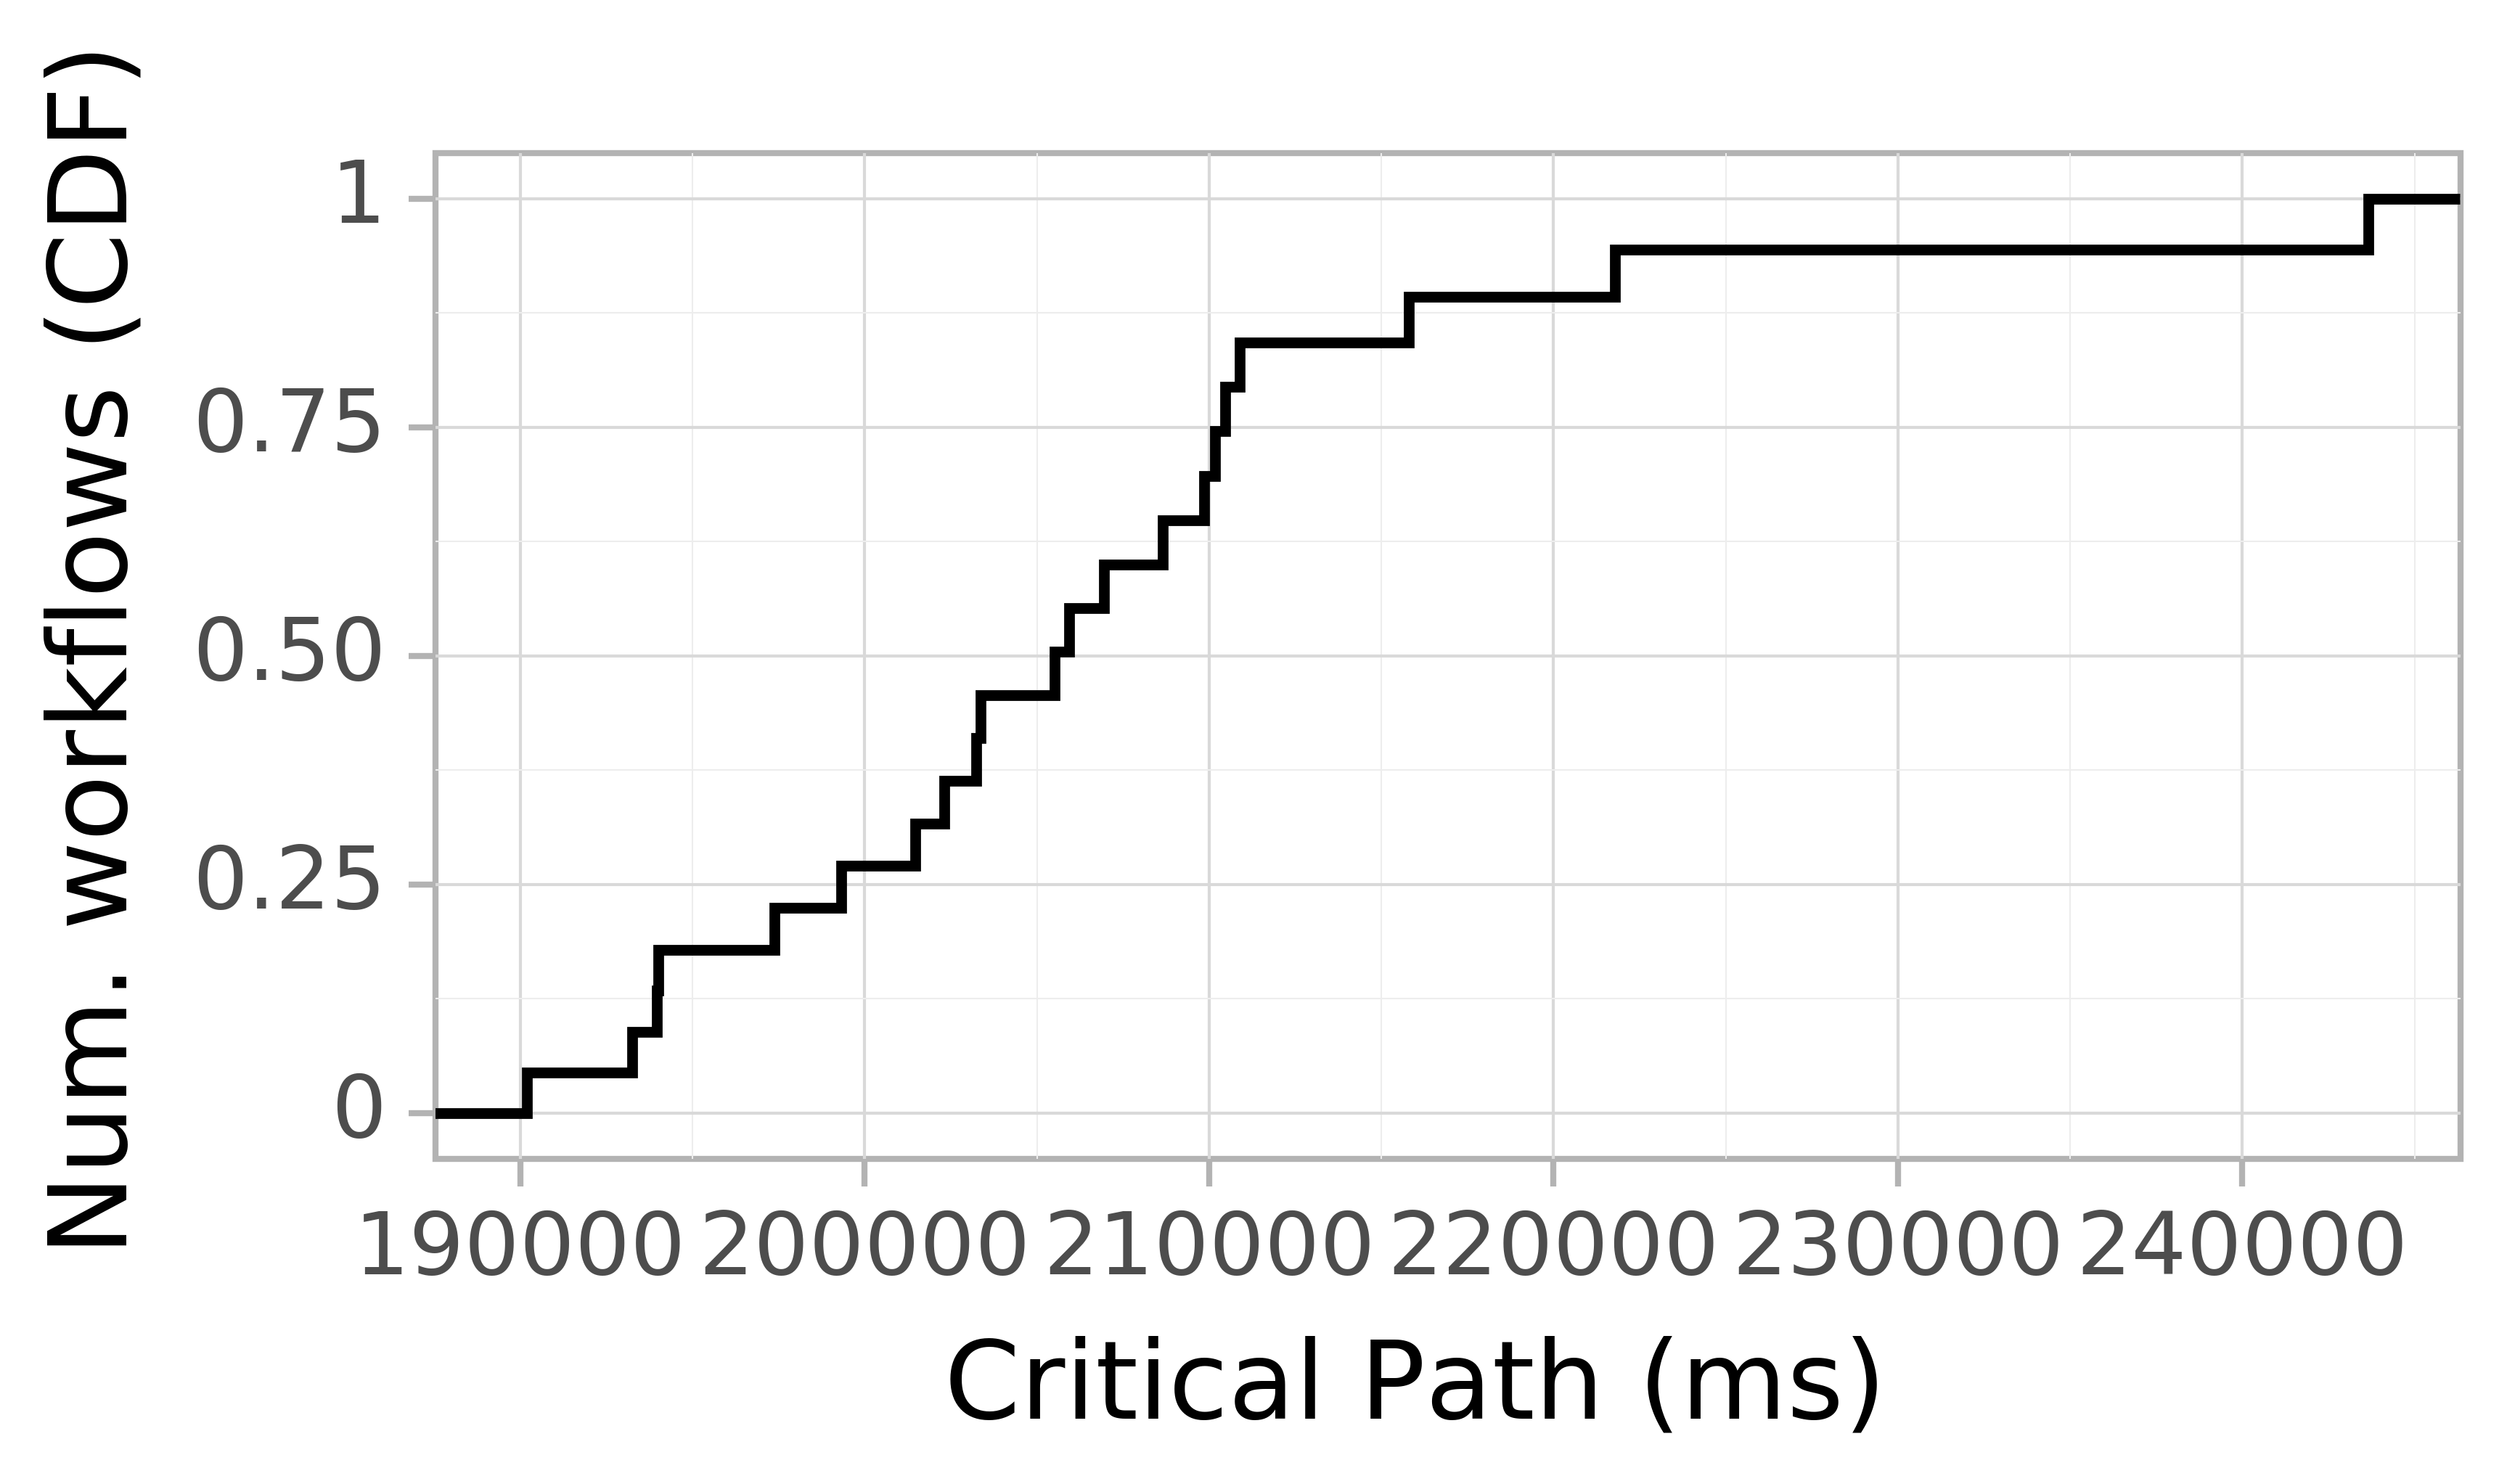 Job runtime CDF graph for the askalon-new_ee36 trace.